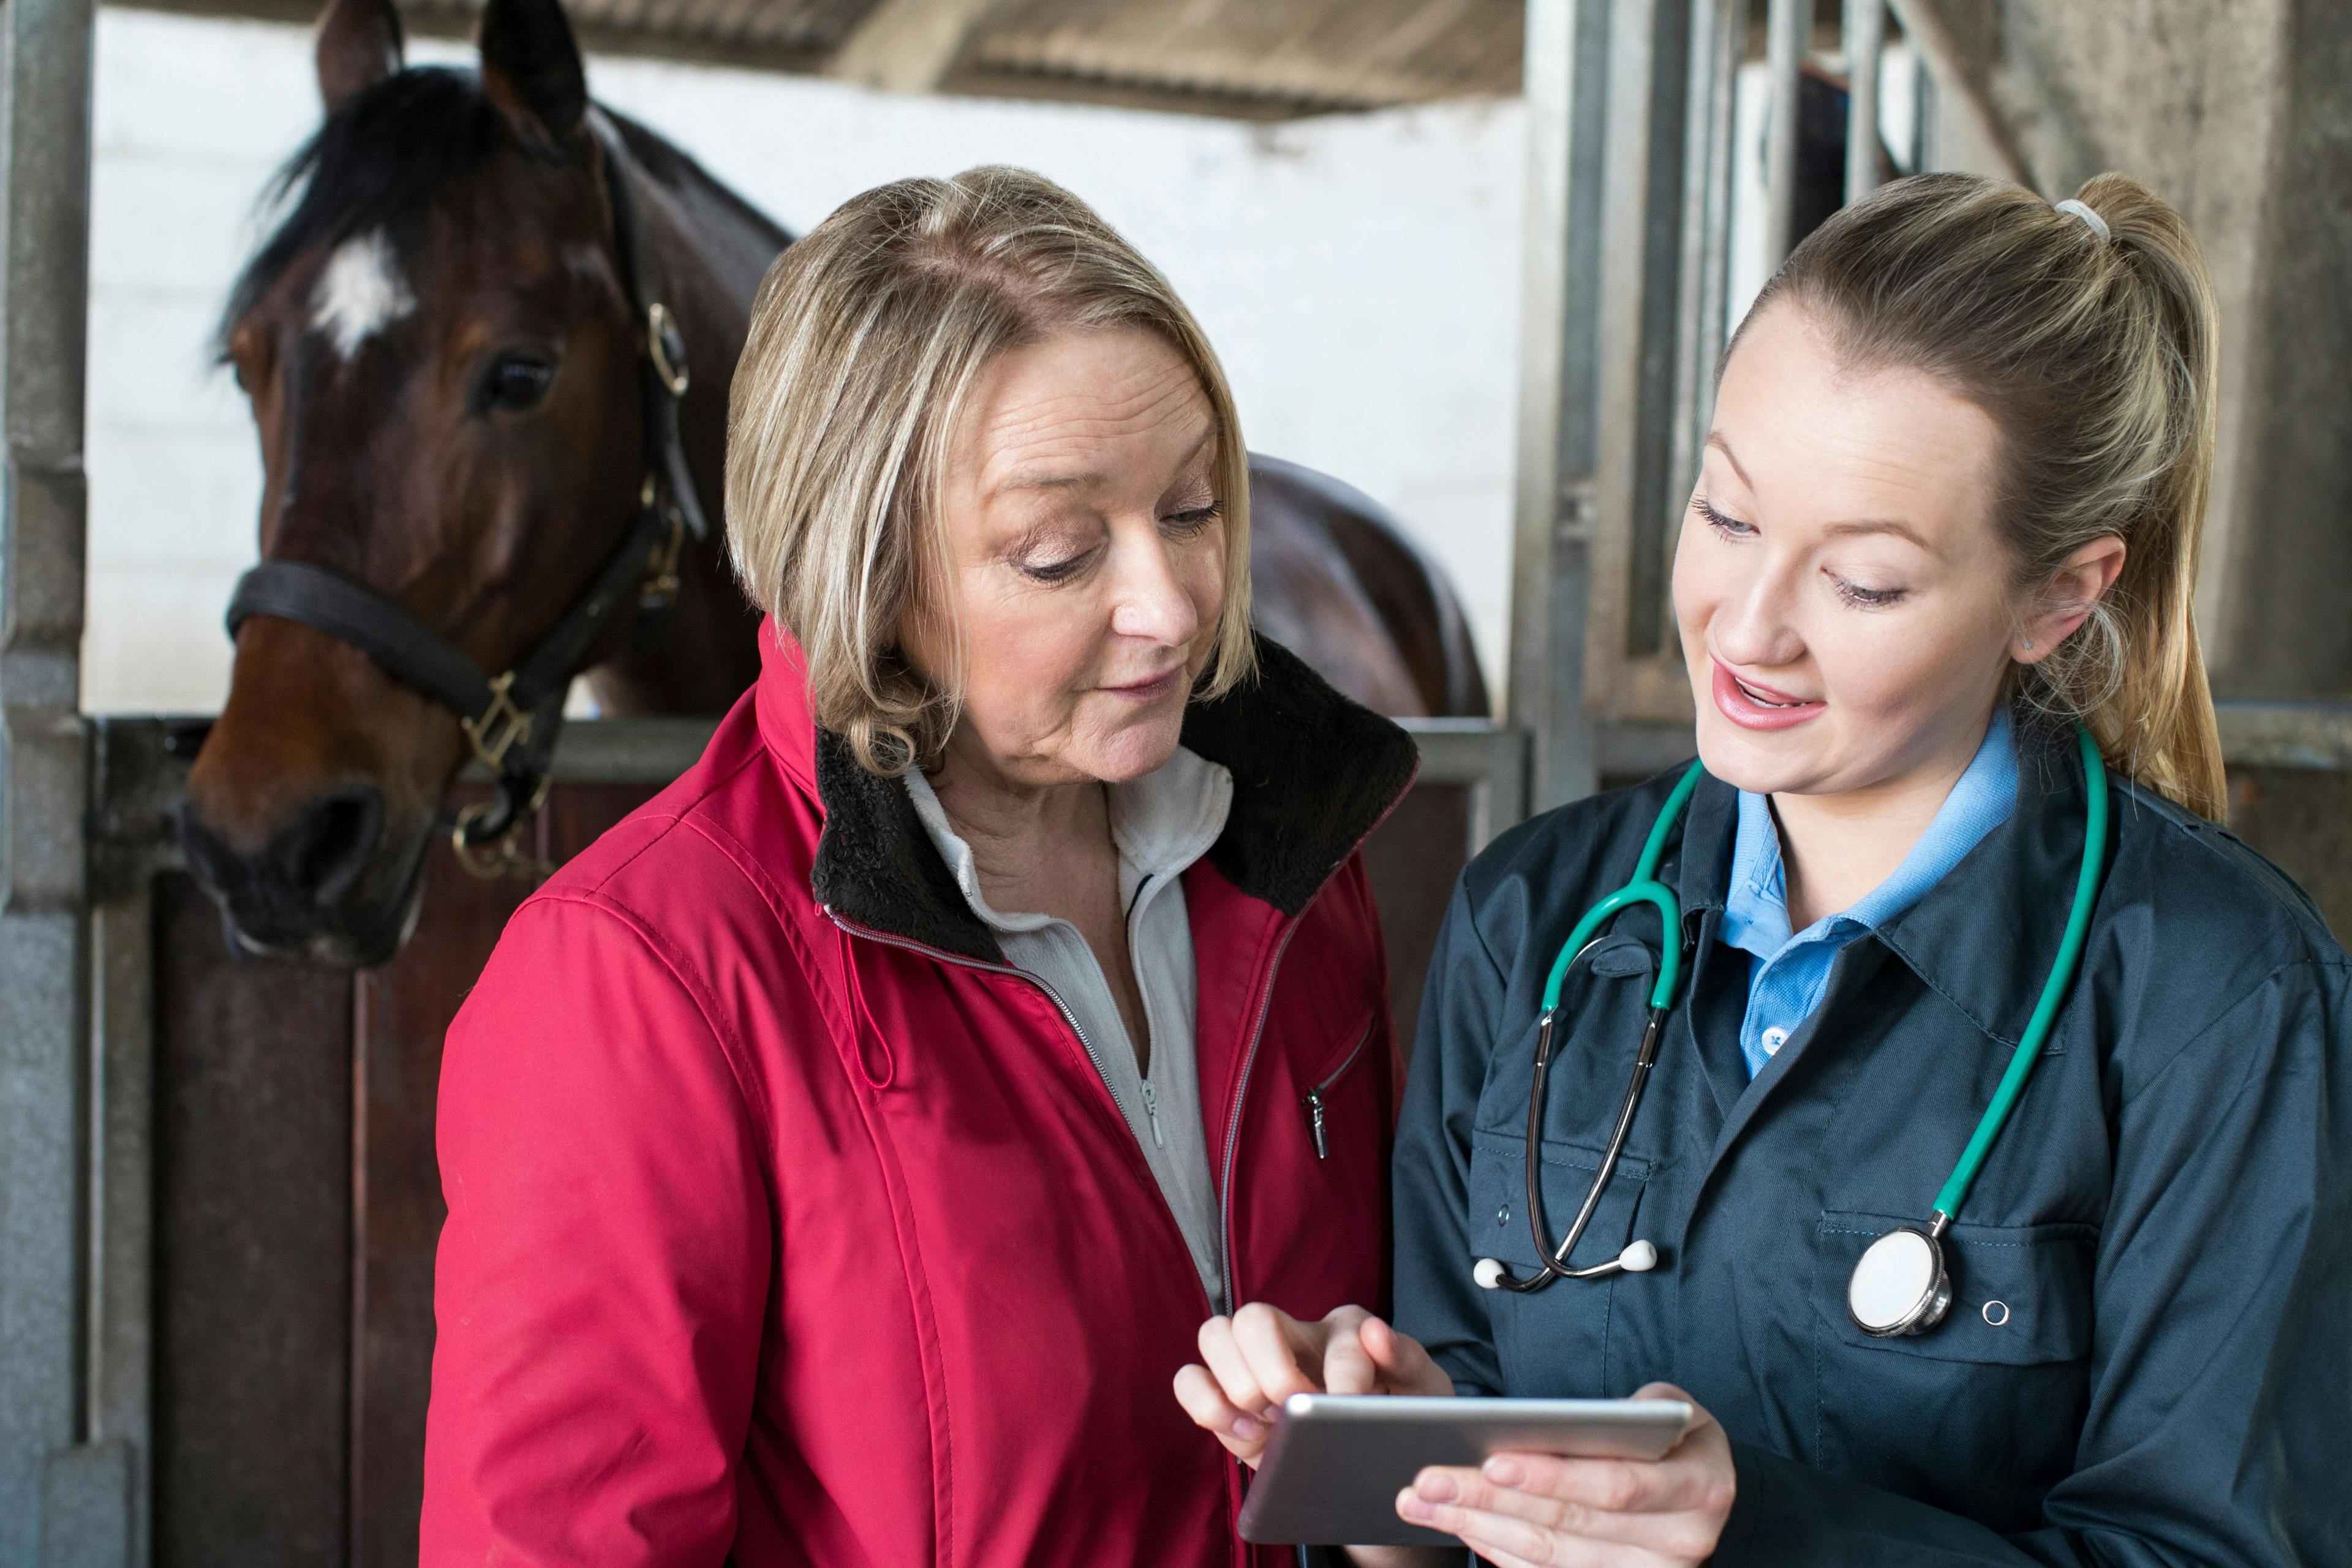 Horse owners’ confidence with common analgesia medications